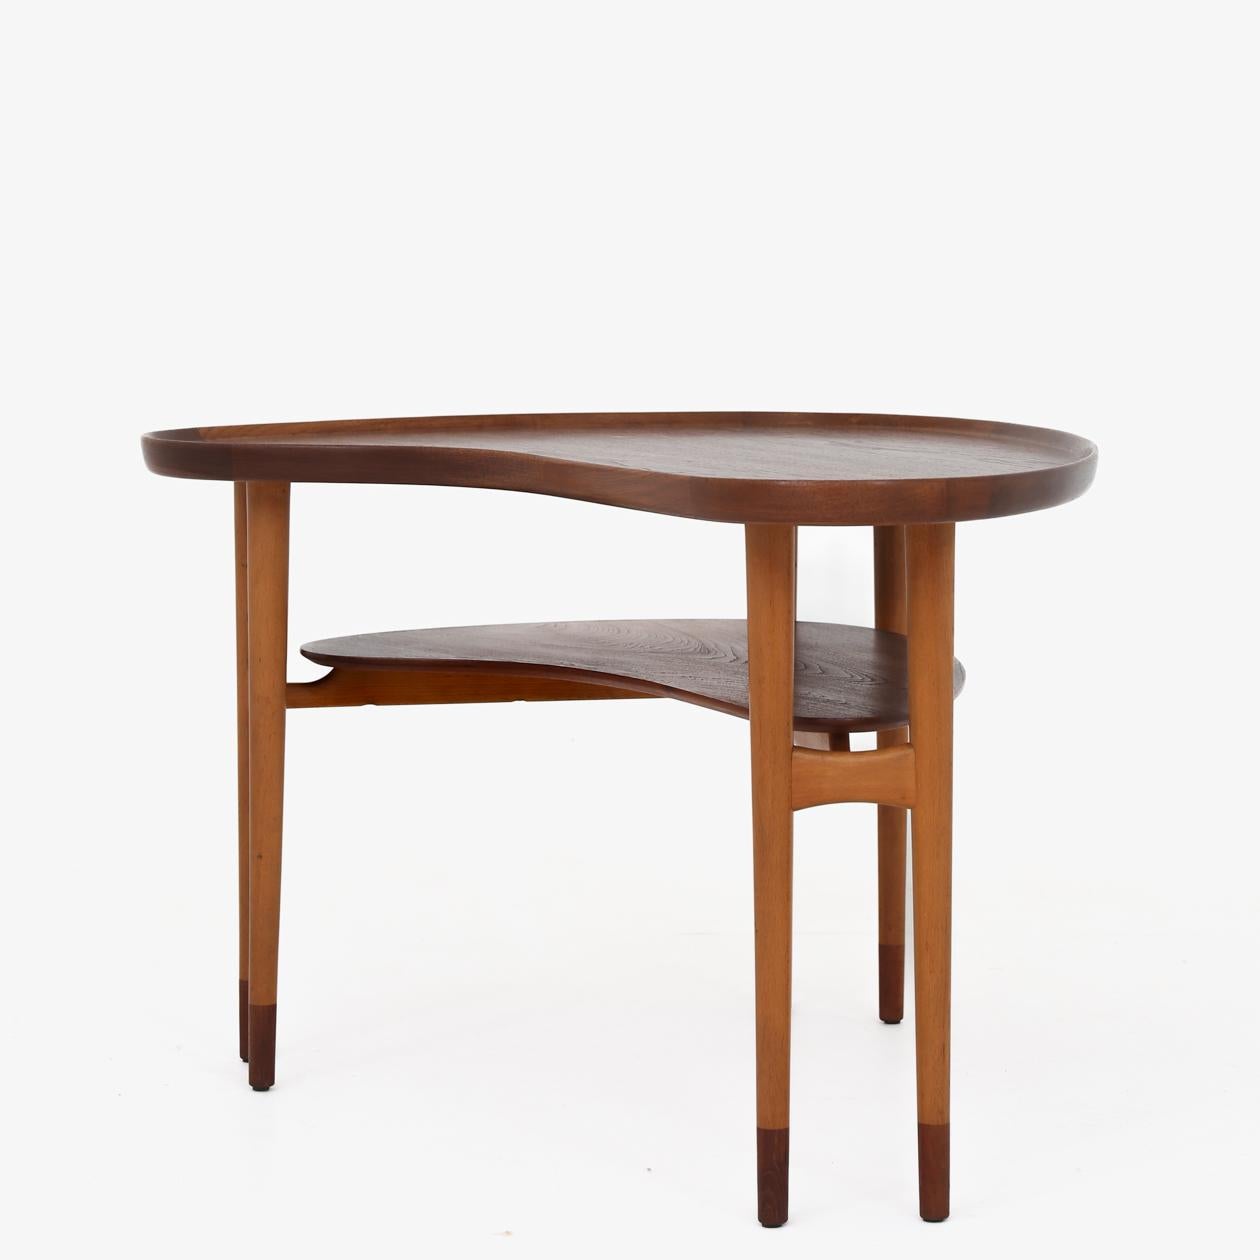 Coffee table with a fluted edge. Top and shoes in teak and frame in patinated beech. Arne Vodder / Bovirke.